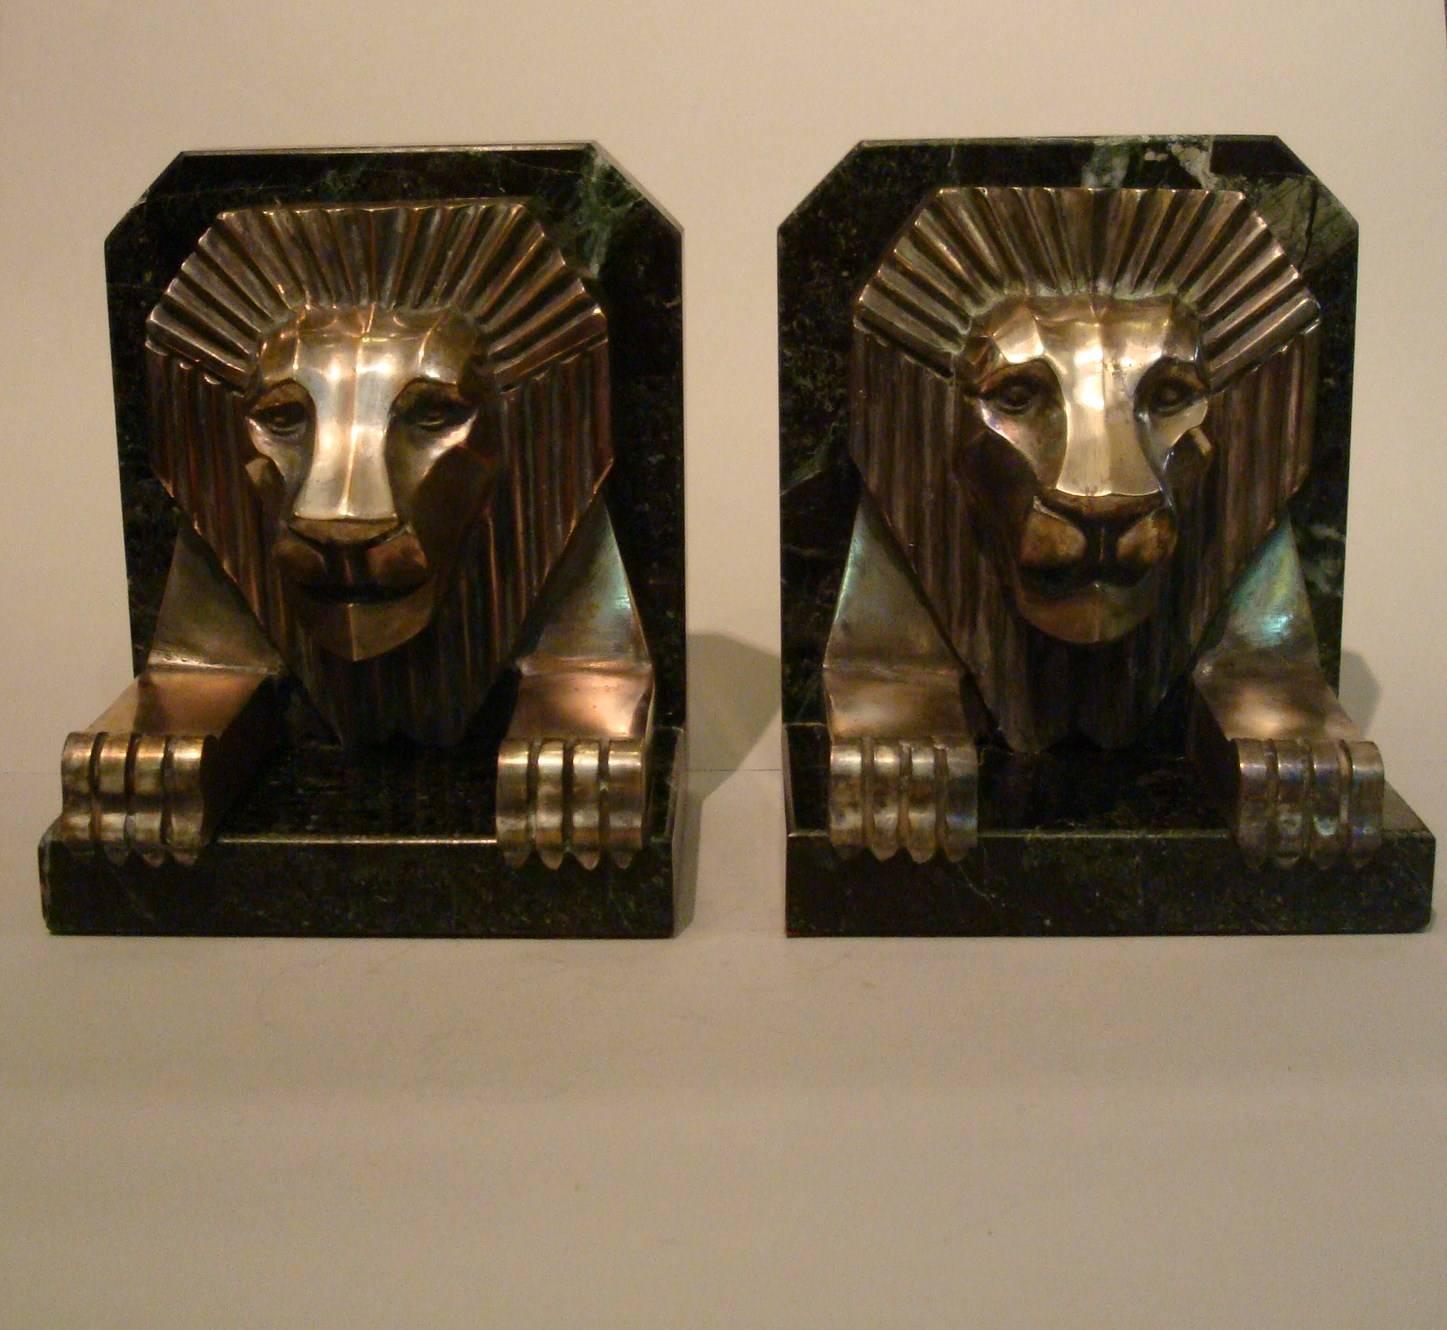 Silvered Art Deco Bronze and Marble Lion Bookends, Jacques Cartier, France, 1925